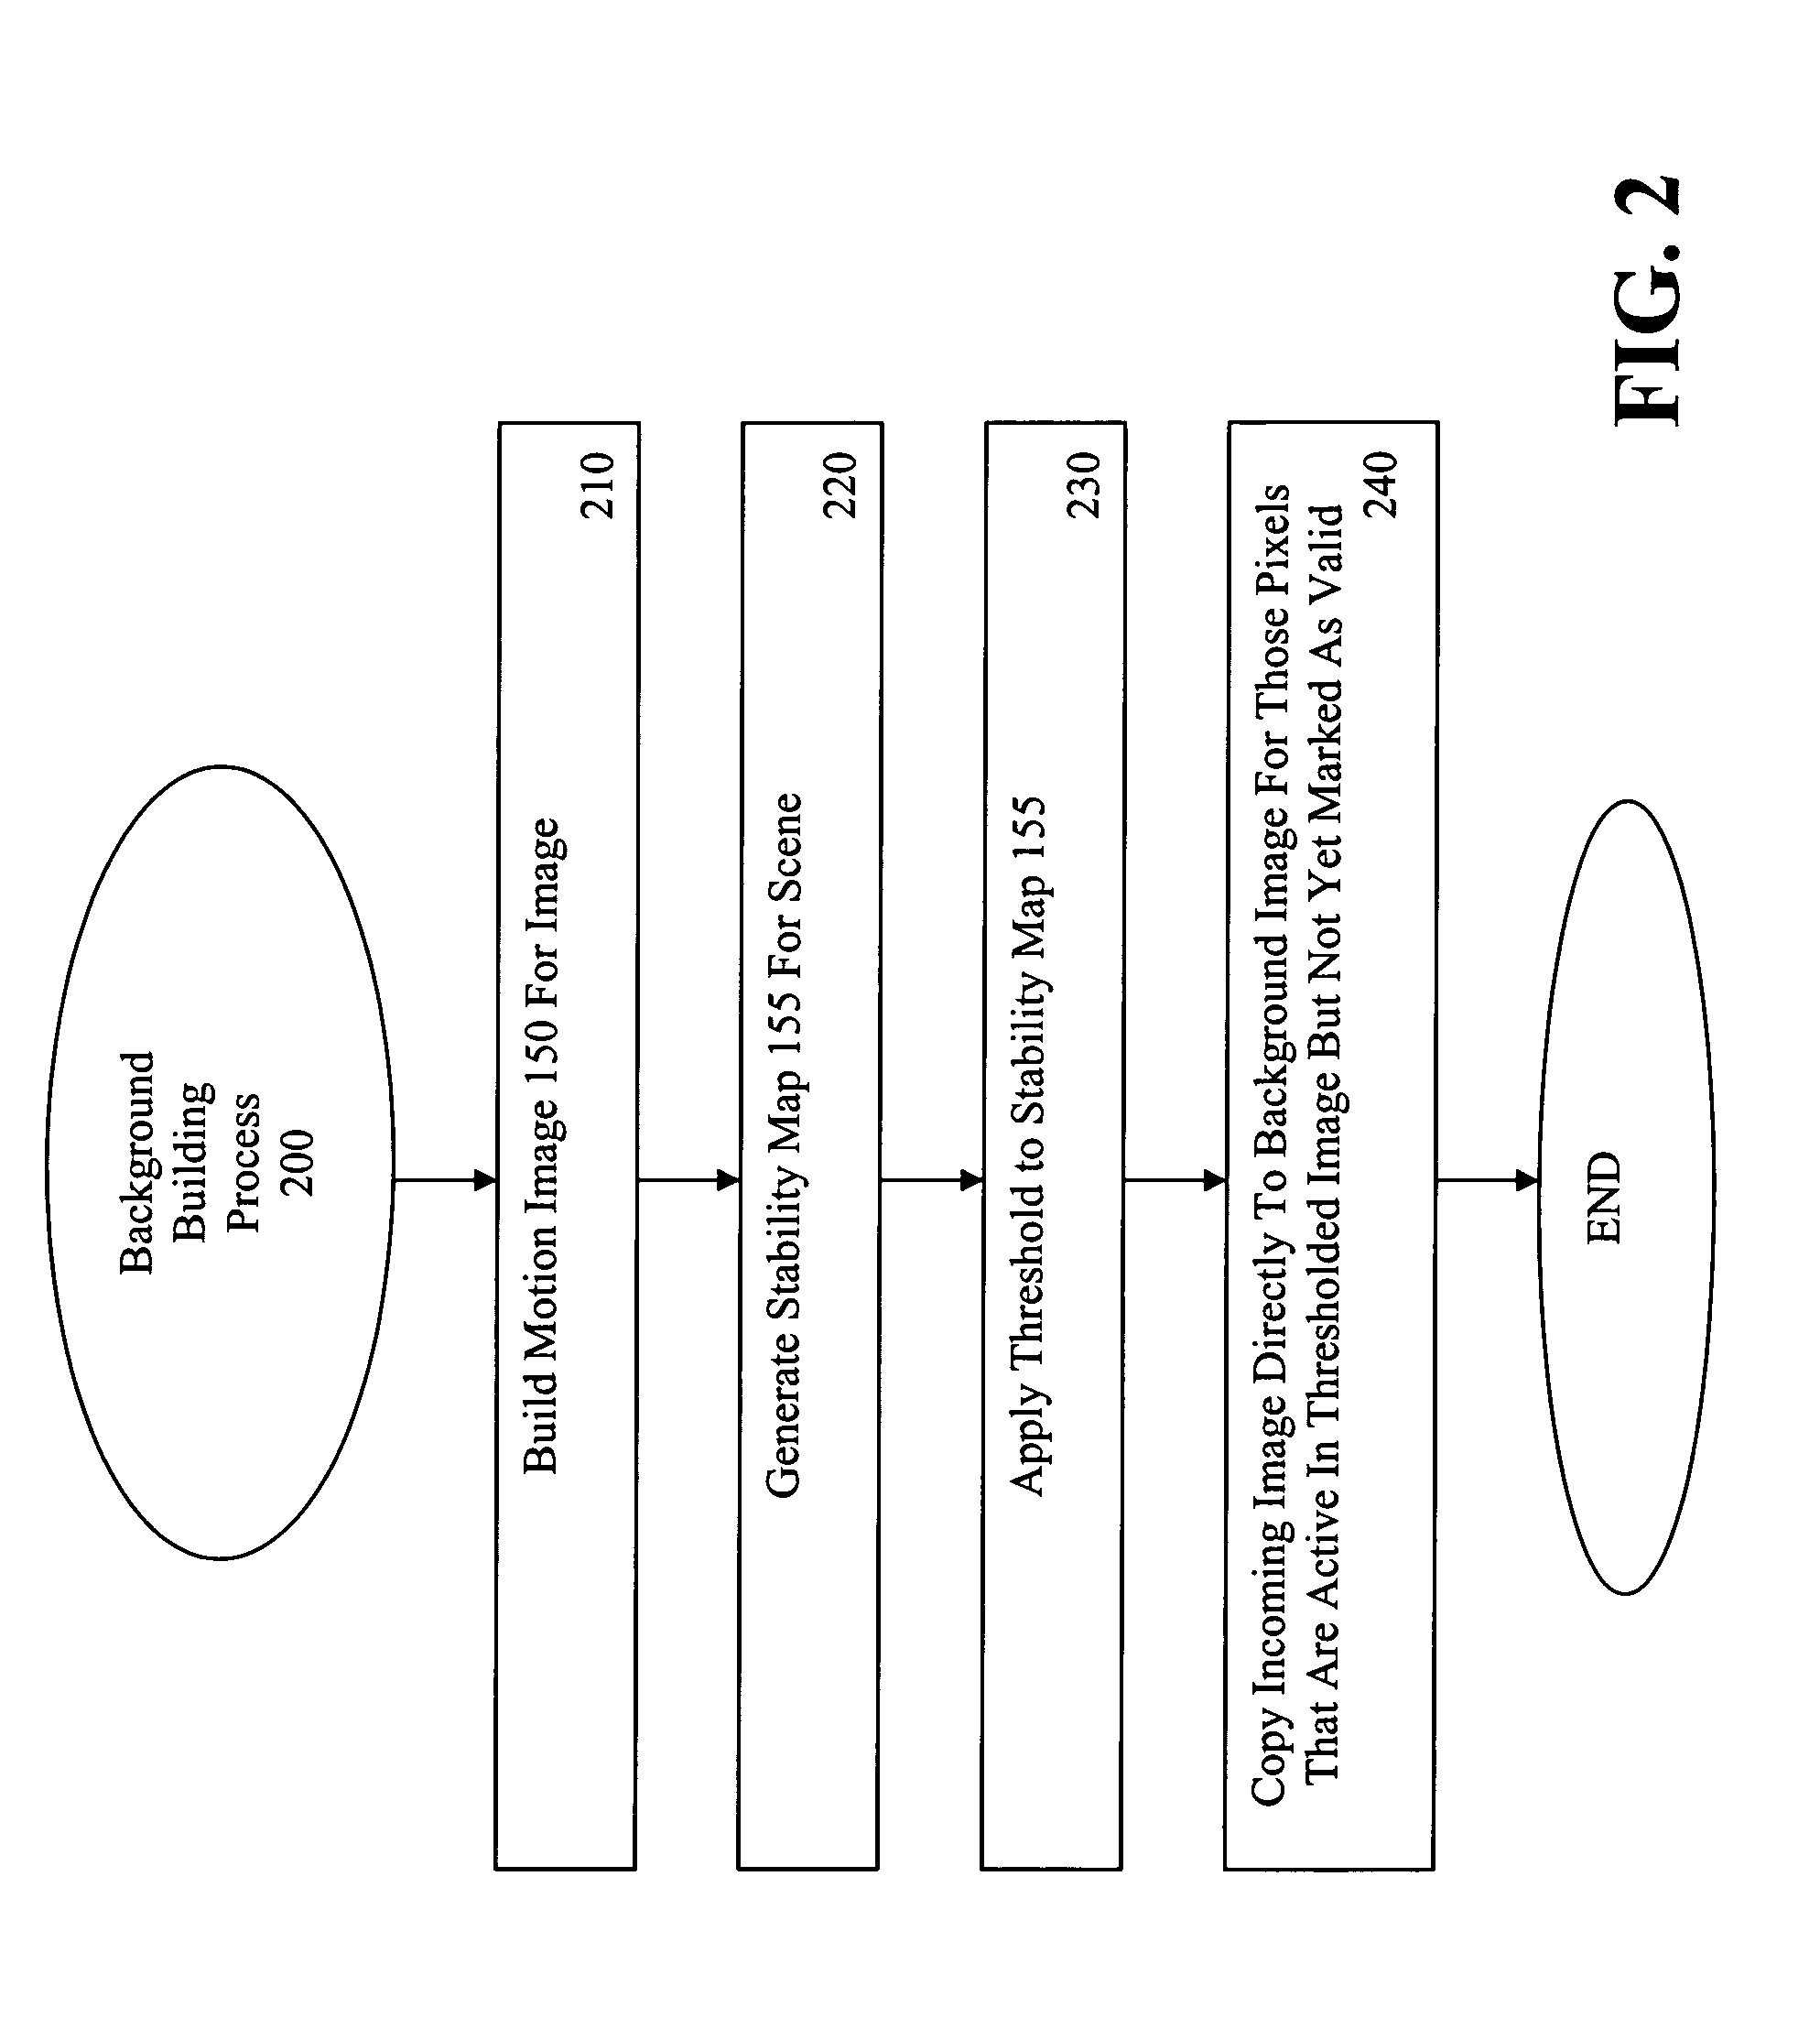 Method and apparatus for maintaining a background image model in a background subtraction system using accumulated motion